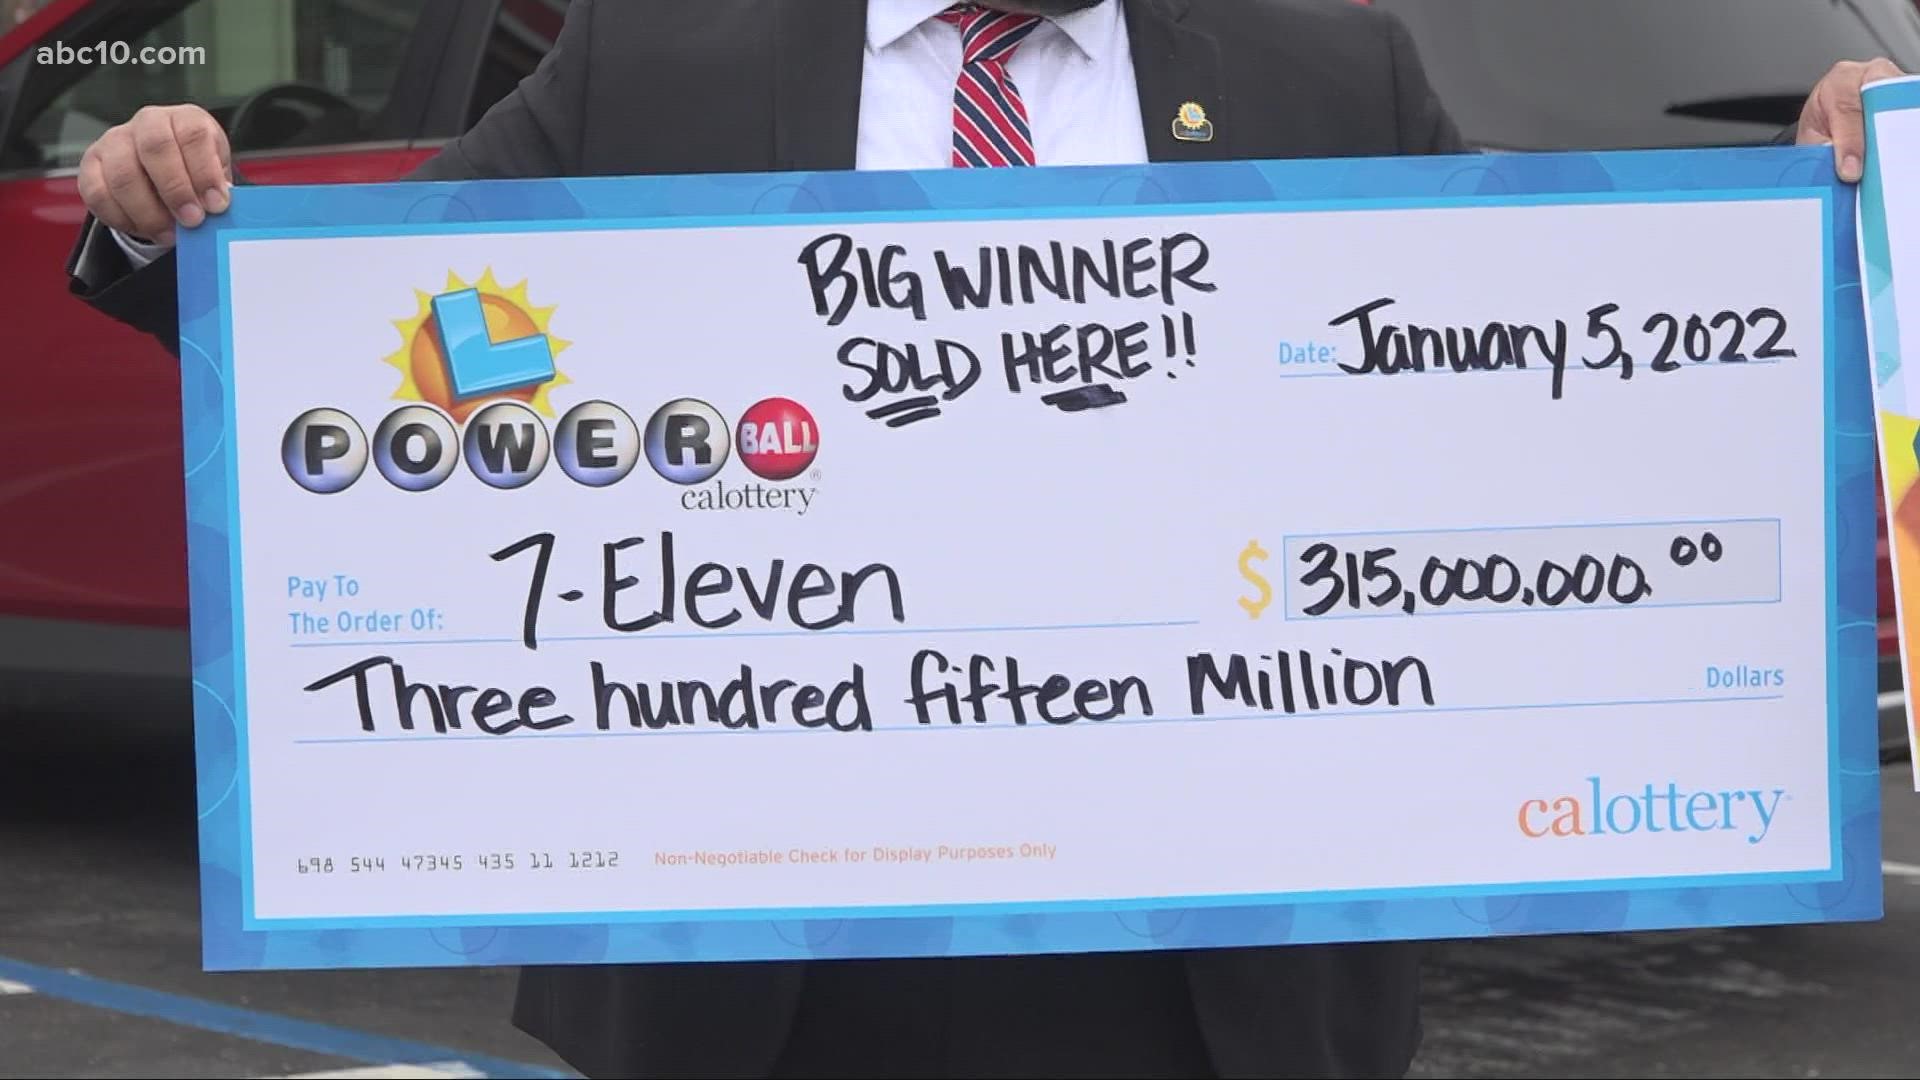 With the winning ticket recently sold at the 7-Eleven, its franchisee Harpreet Dhillon said he will be getting $1 million of the prize money.